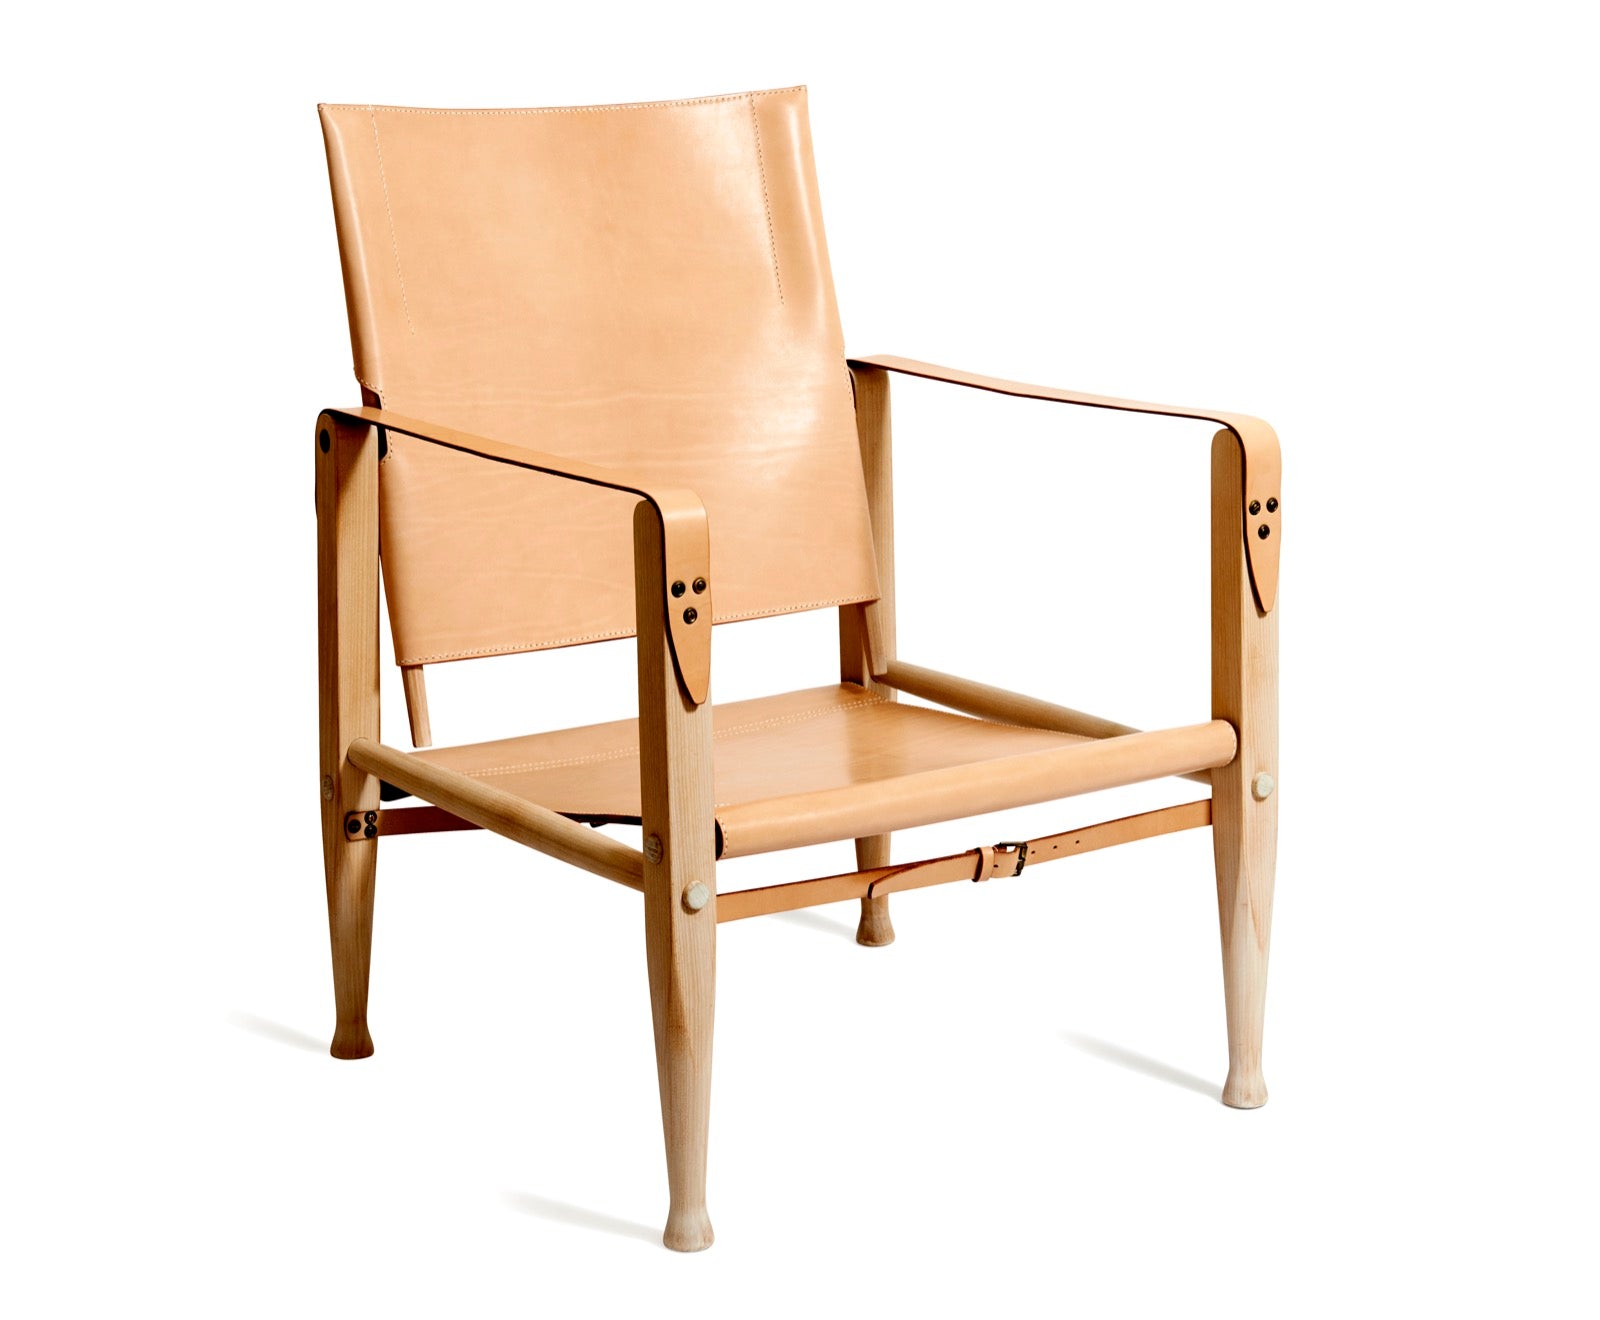 CHAIR - KK47000 SAFARI CHAIR IN ASH AND HARNESS LEATHER